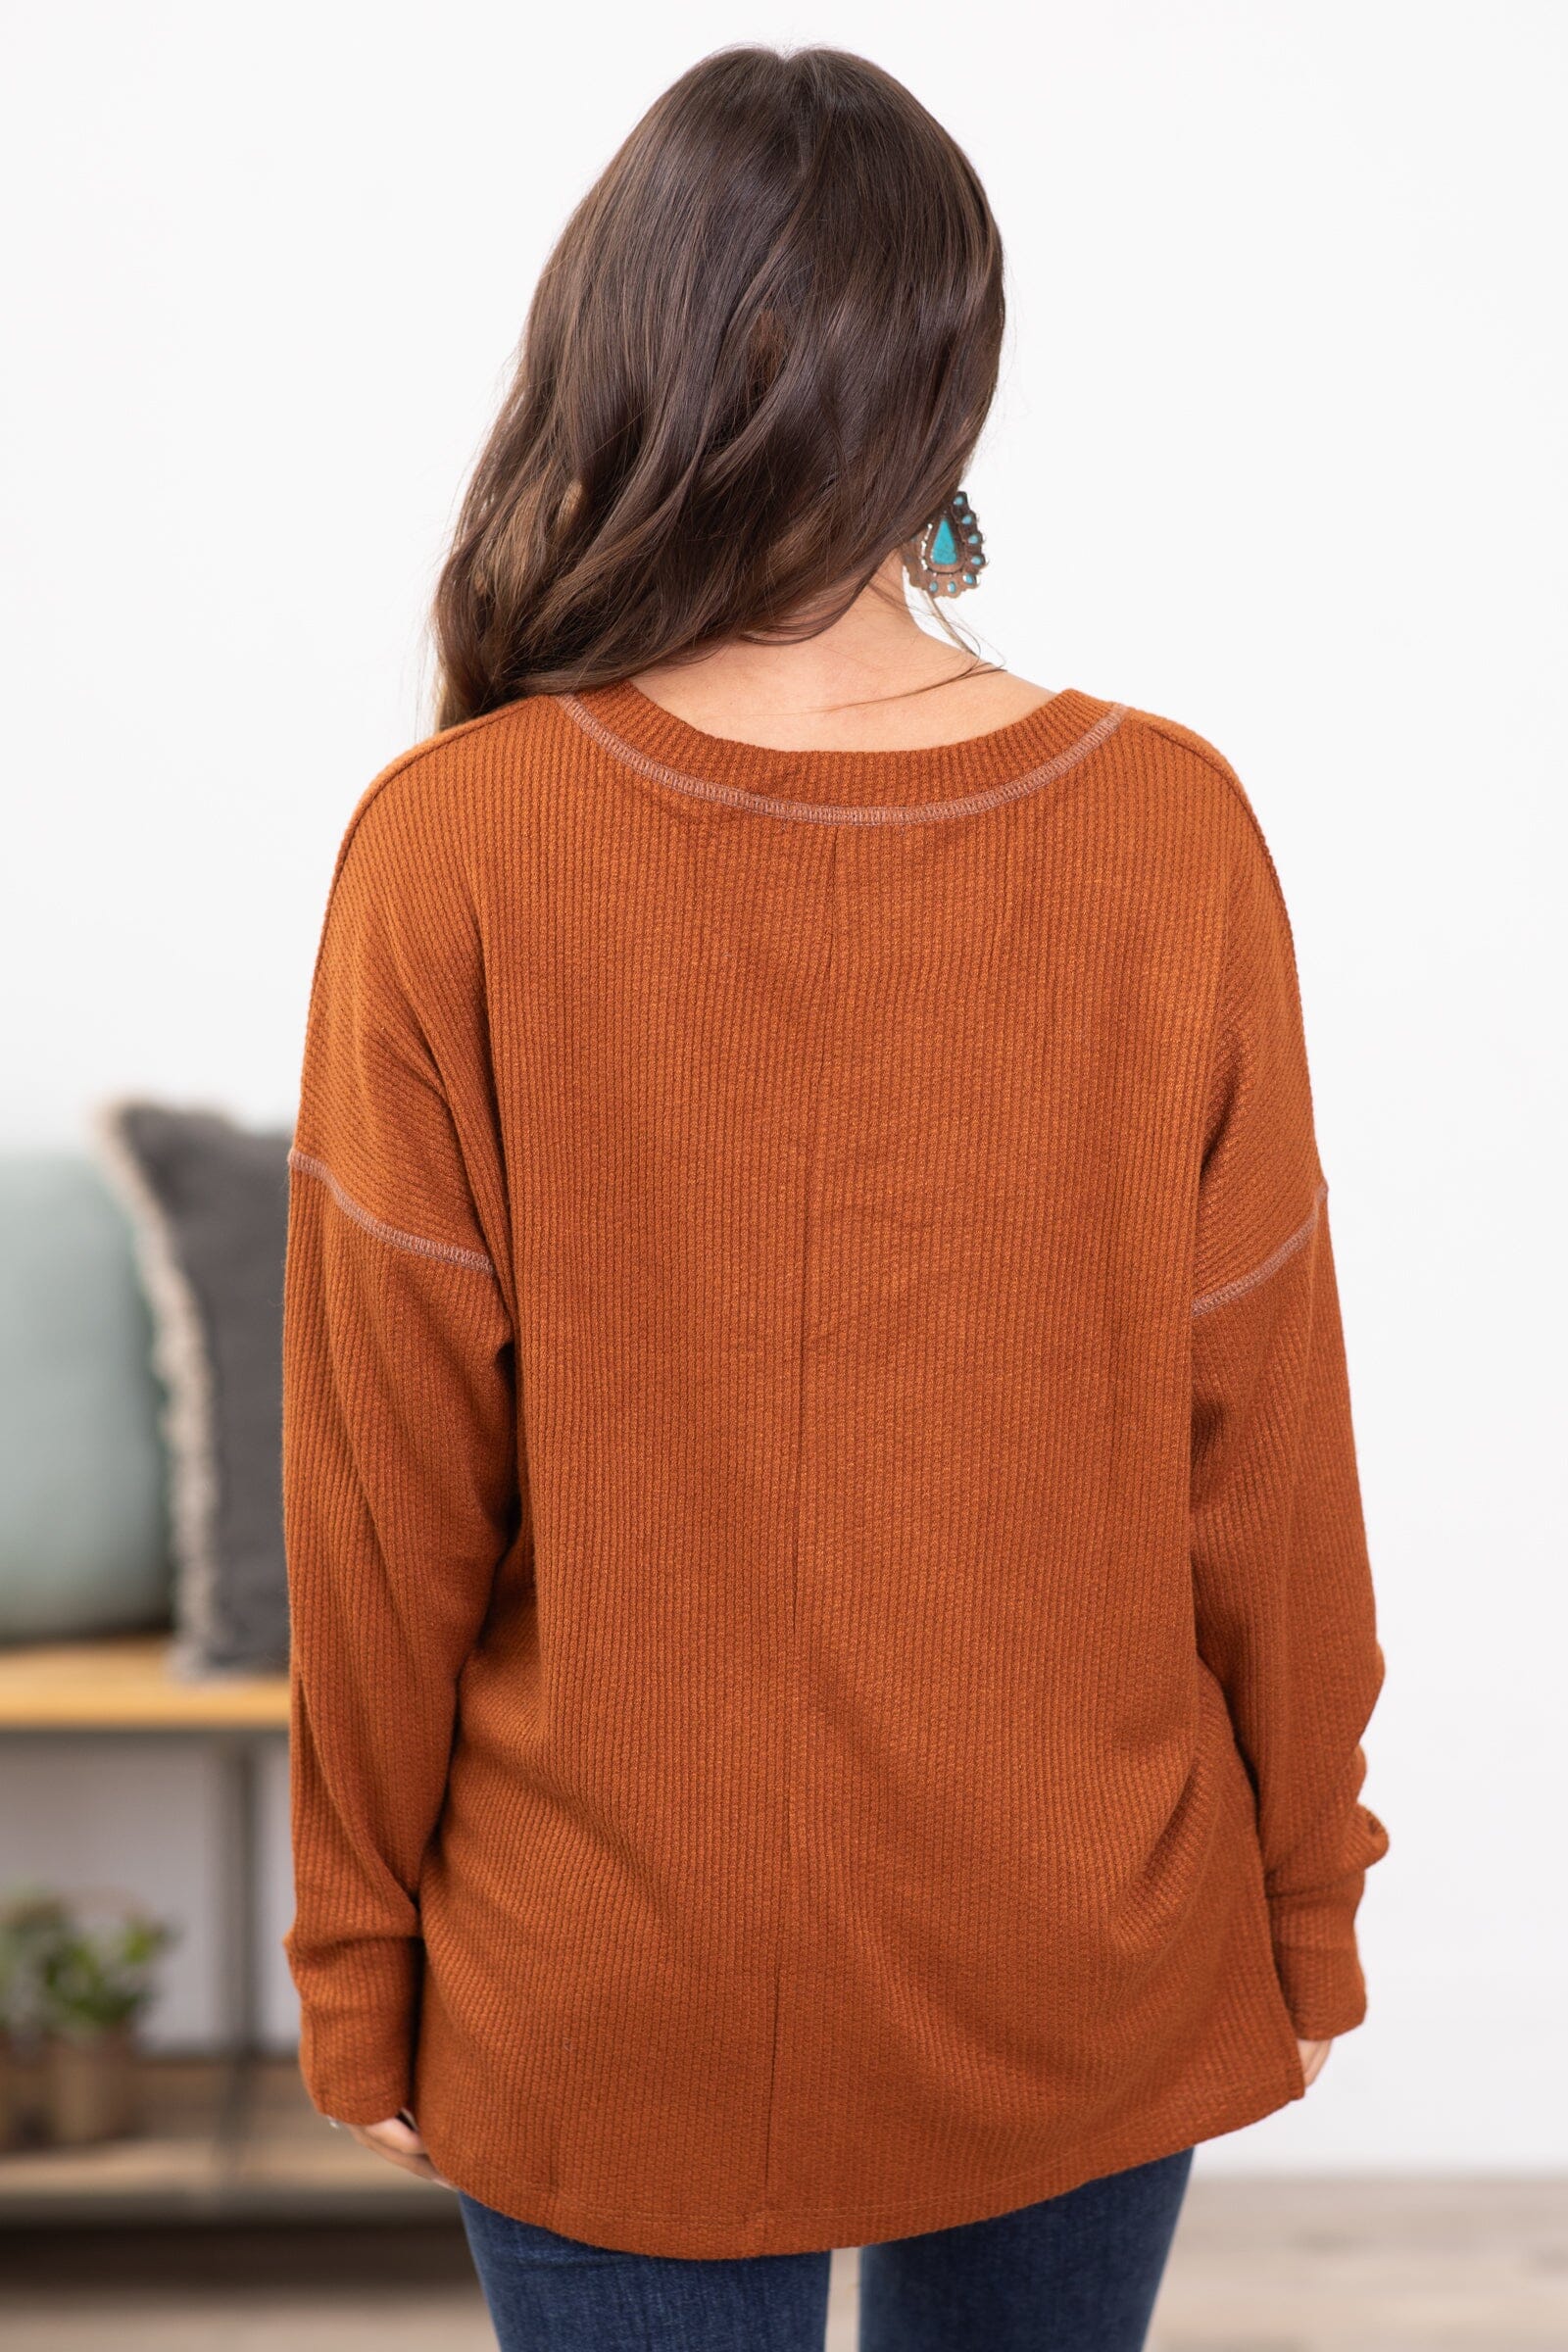 Rust V-Neck Contrast Stitch Top - Filly Flair